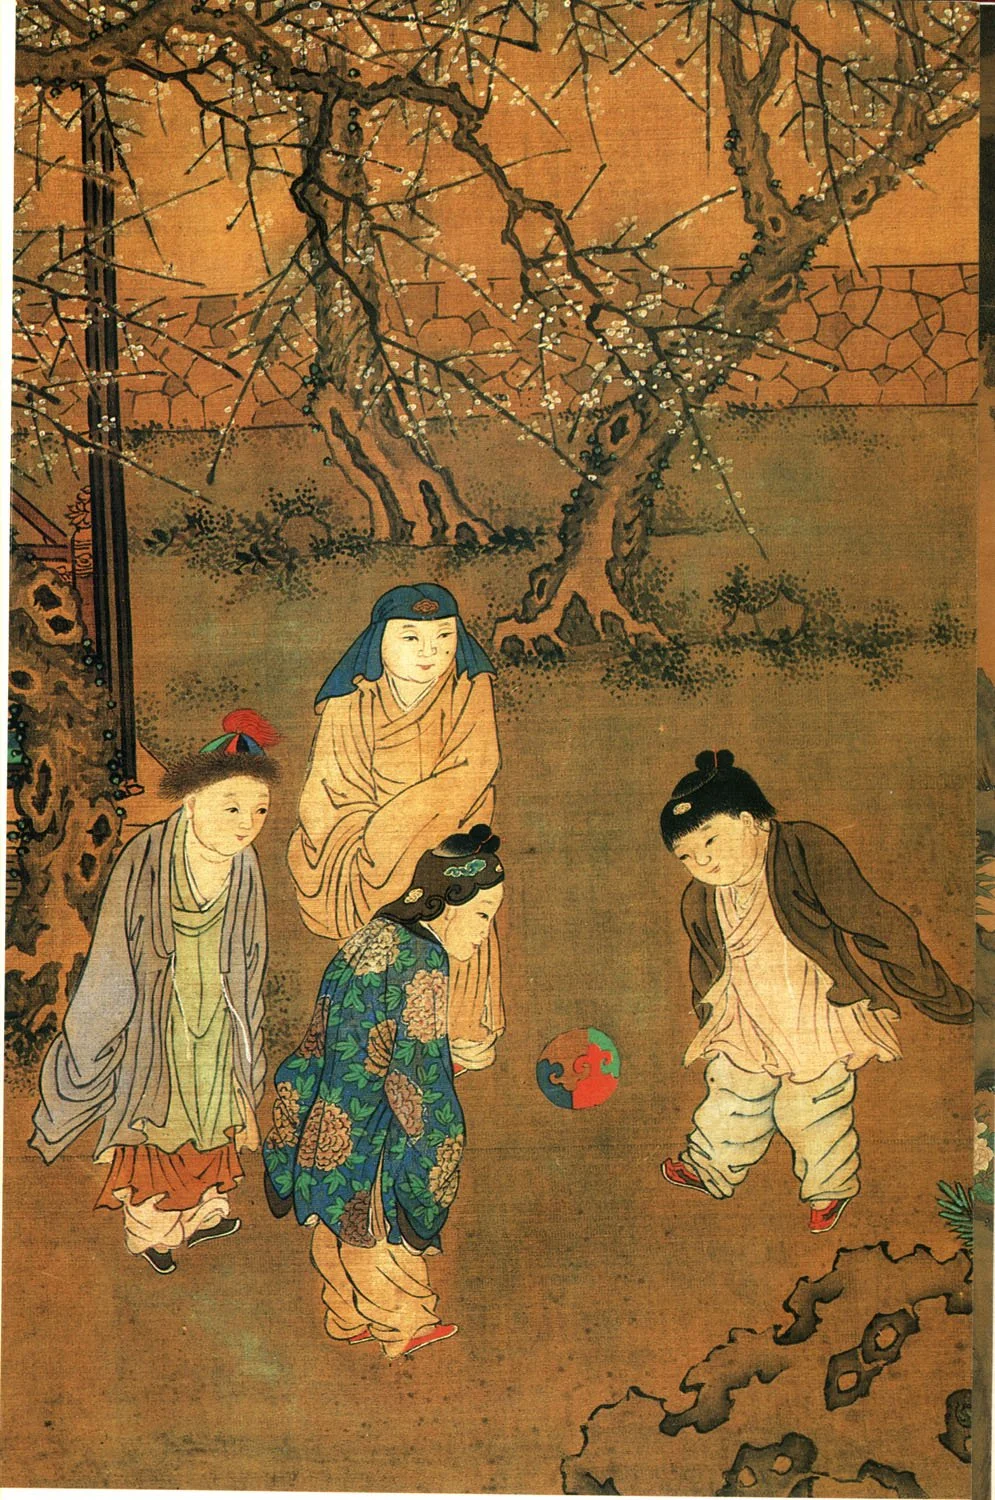 China: One Hundred Children in the Long Spring. Children playing cuju, a precursor of football. Song Dynasty painter Su Hanchen (1101-1160) (National Palace Museum, Taipei)/Wikimedia Commons